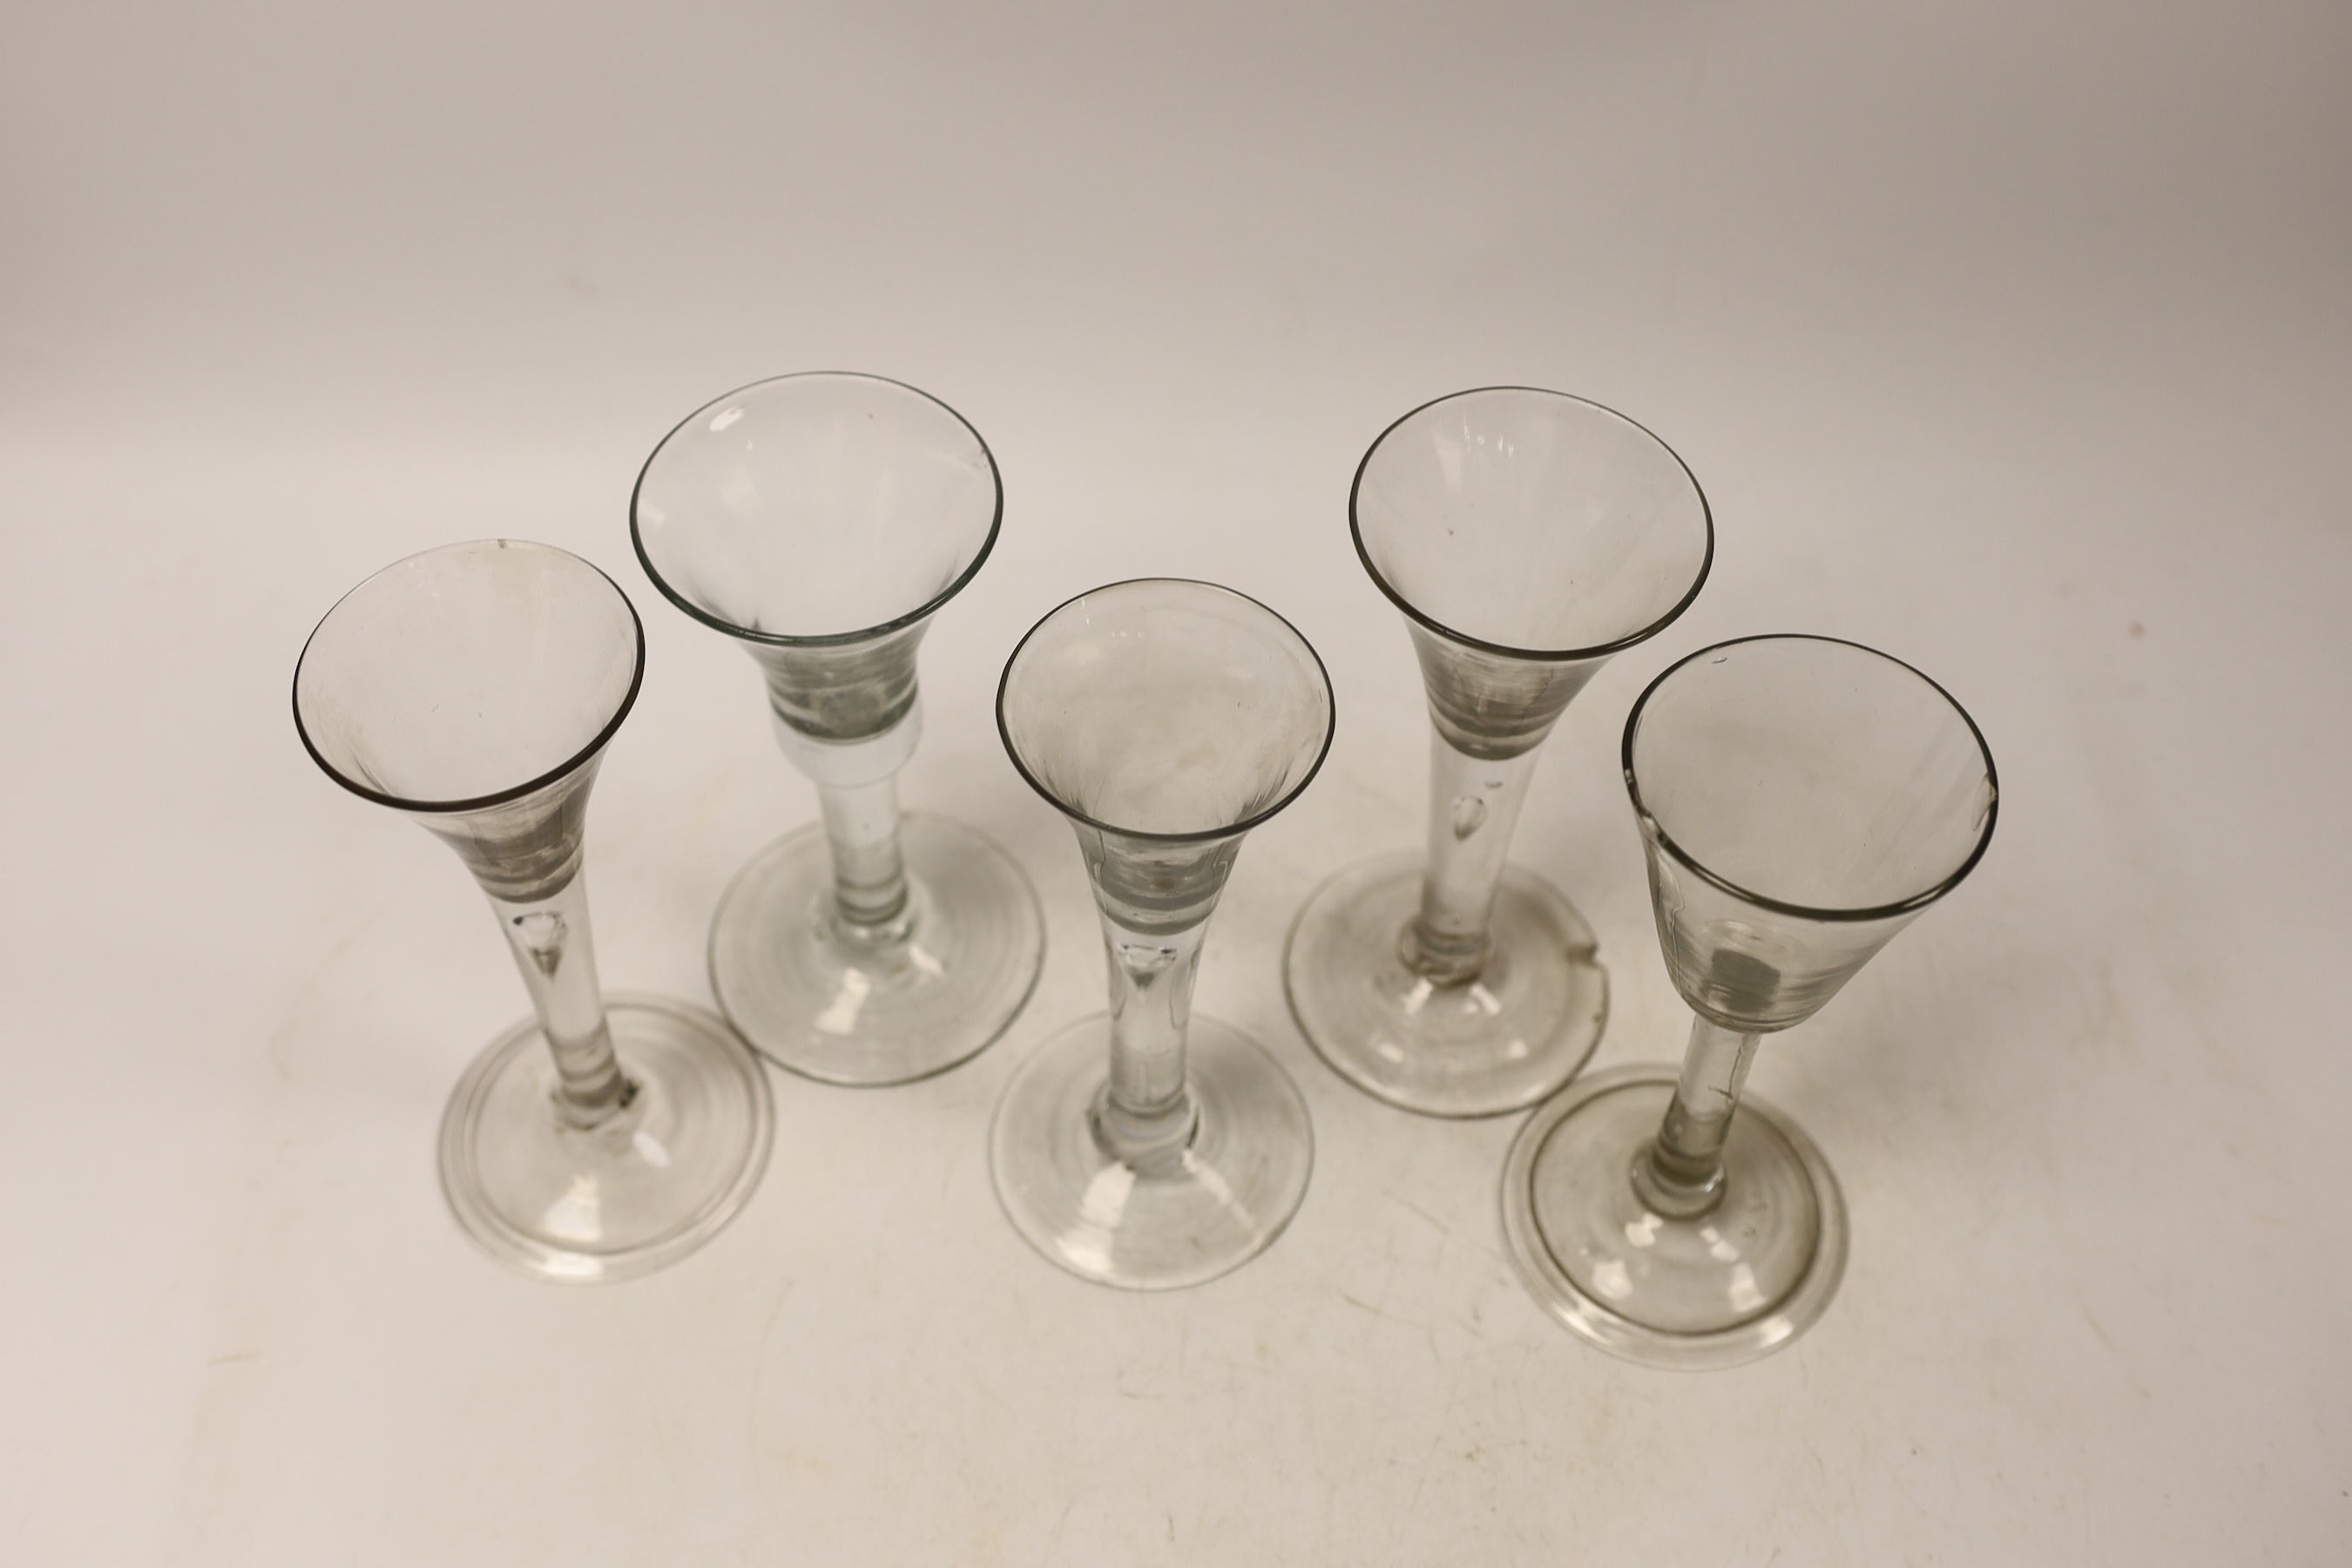 Five mid-18th century plain stem wine glasses, including three with drawn trumpet shaped bowls, two examples with folded feet, tallest 16cm